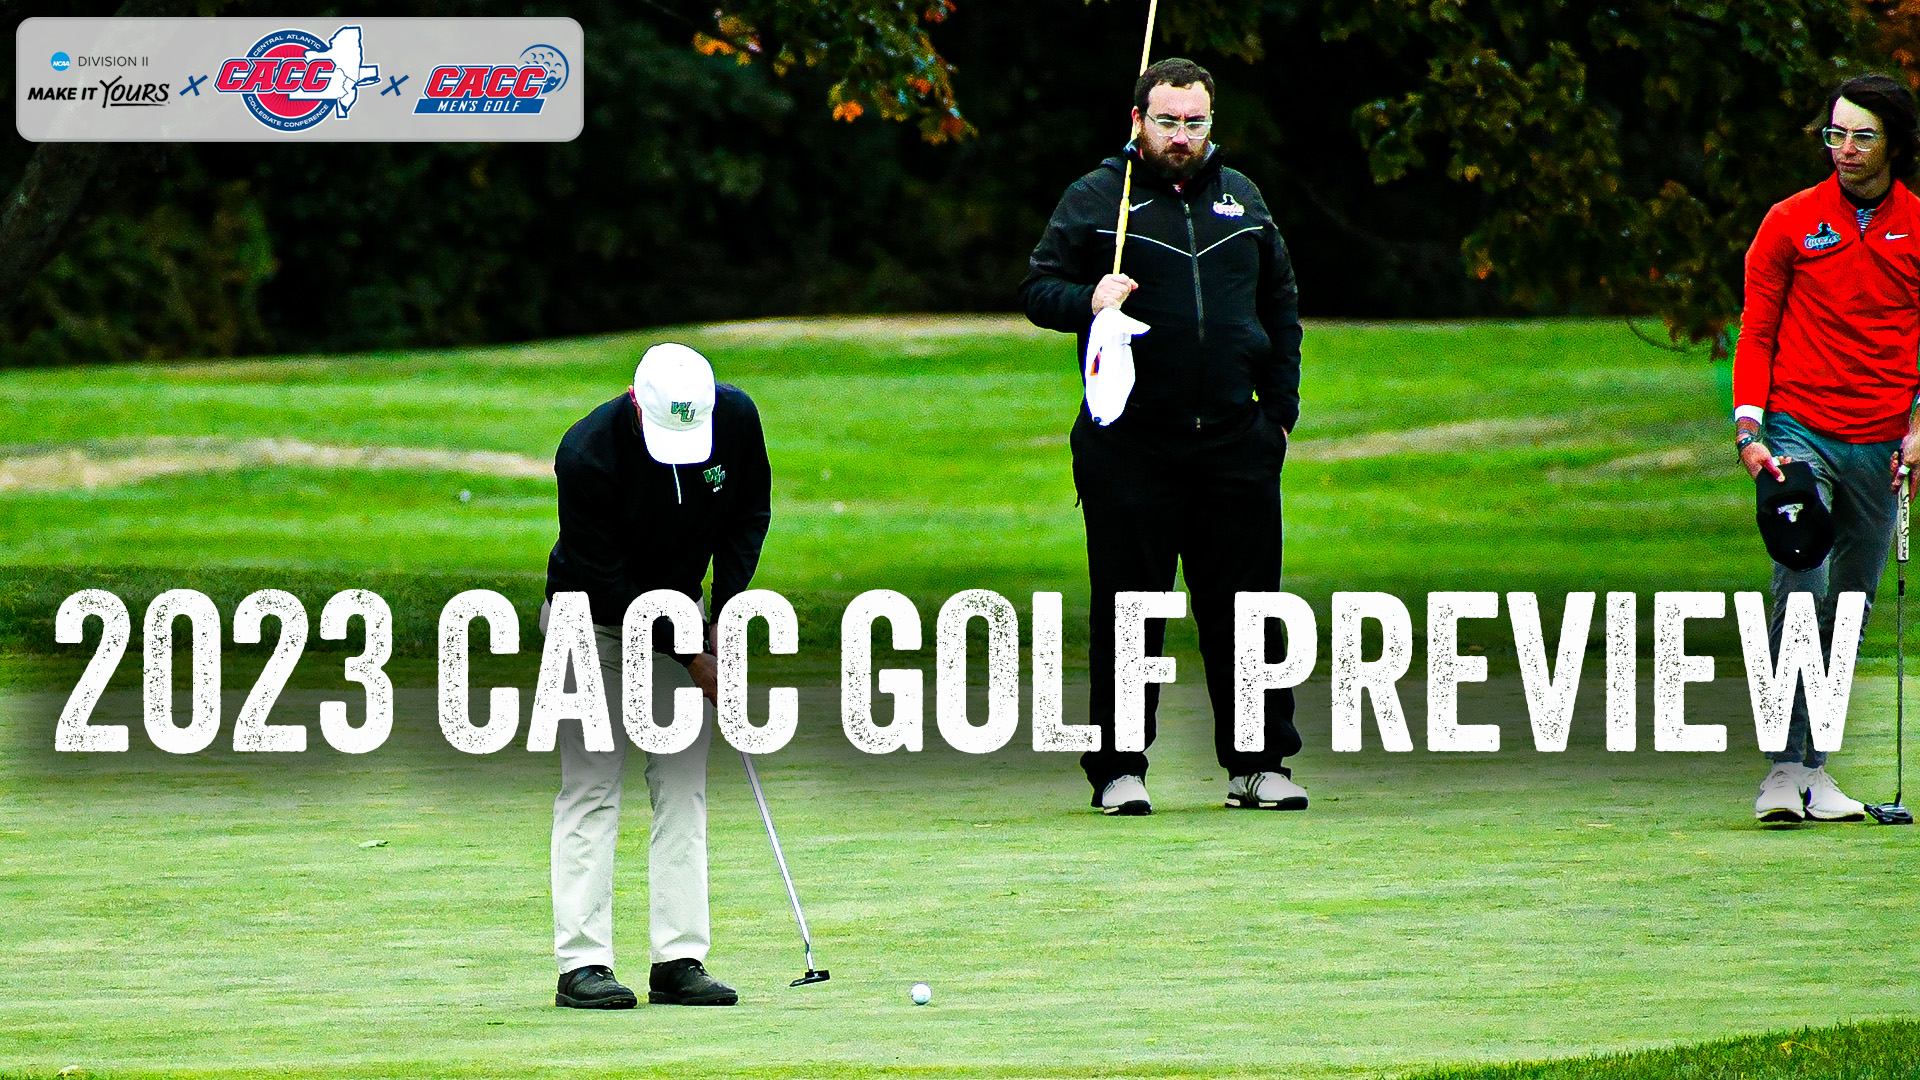 2023 CACC Men's Golf Preview